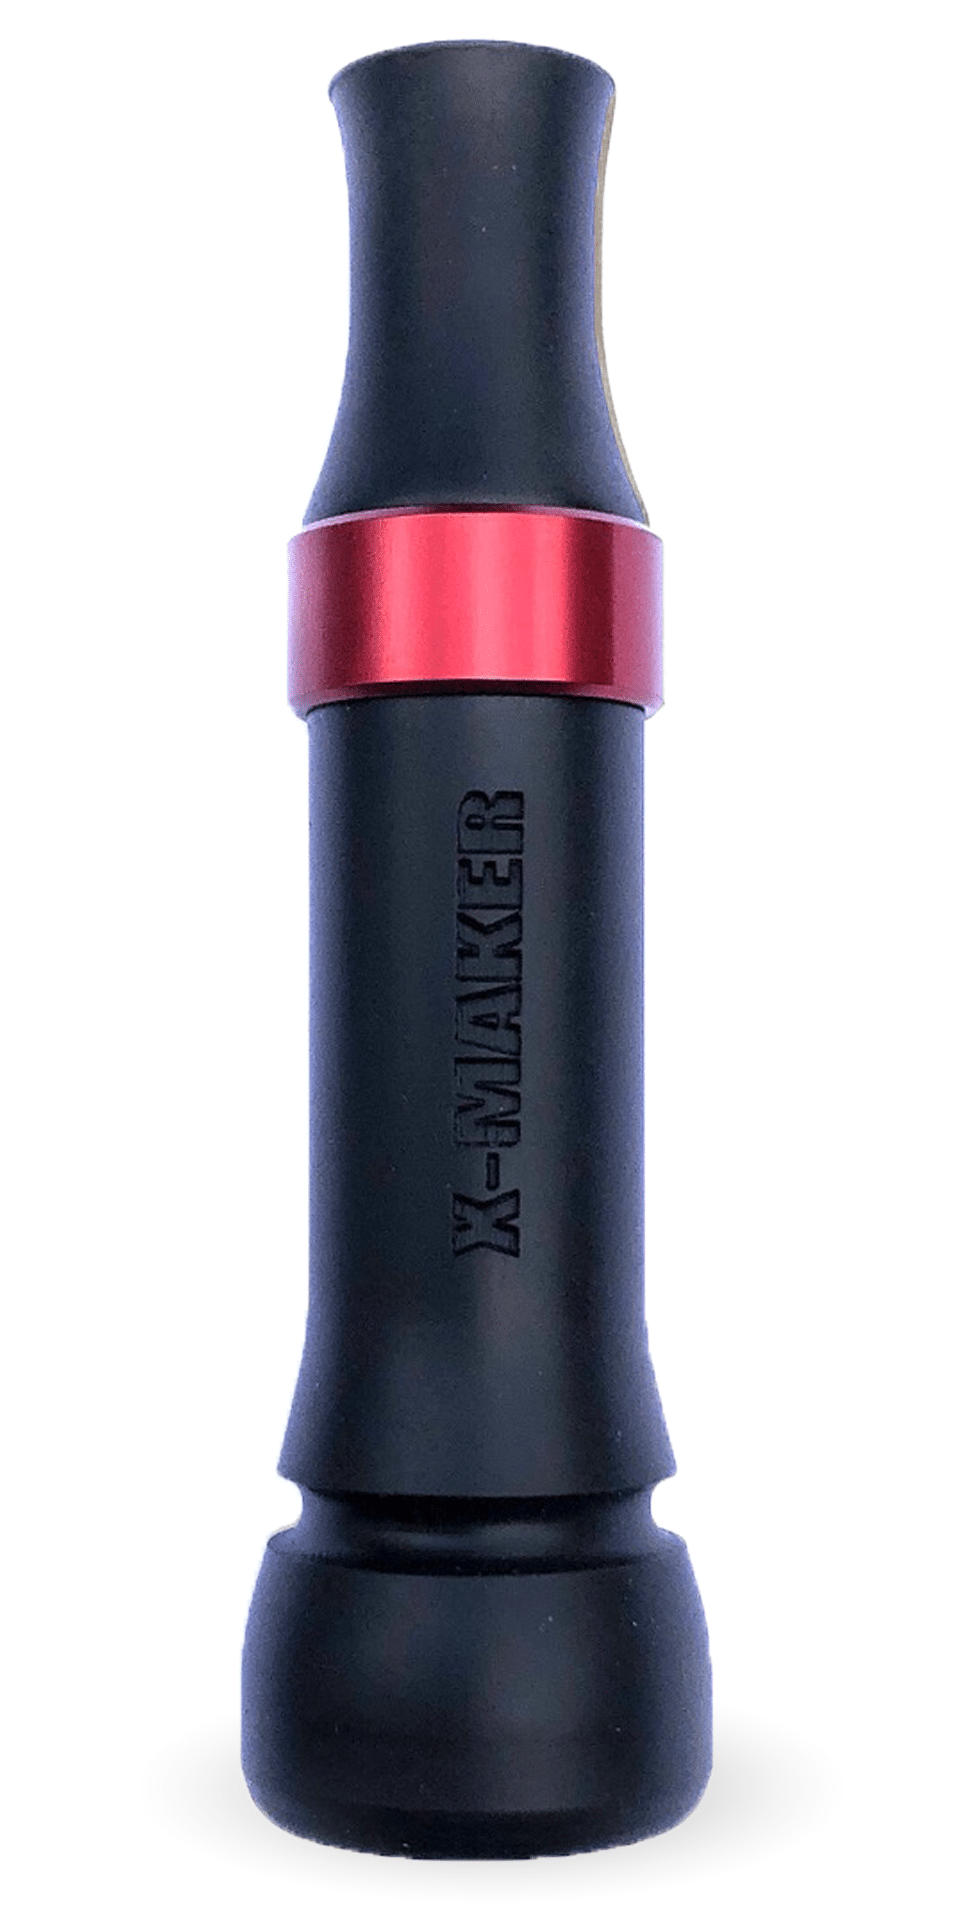 Elevate Your Duck Hunting with the X-MAKER Cut-Down Duck Call Introducing the X-MAKER Cut-Down Duck Call in a sleek flat black finish, accented with a classic red band. This premium call is designed to elevate your hunting experience with unmatched precision and performance. Key Features: Superior Responsiveness: The X-MAKER Cut-Down Duck Call excels in both high and low-end tones, delivering a loud, smooth, and realistic quack that captures the attention of ducks. User-Friendly Design: Crafted for hunters of all skill levels, this call is incredibly easy to use, ensuring success whether you're a novice or a seasoned pro. American-Made Quality: Proudly crafted in the USA from high-quality hard-cast acrylic, this call embodies durability and excellence. Expert Craftsmanship: Each duck call is hand-made, expertly designed, and meticulously hand-tuned by the legendary Kirk McCullough, guaranteeing top-tier performance. Don't settle for anything less than the best. Choose the X-MAKER Cut-Down Duck Call and experience the difference that superior craftsmanship and precision engineering can make in your hunting success.